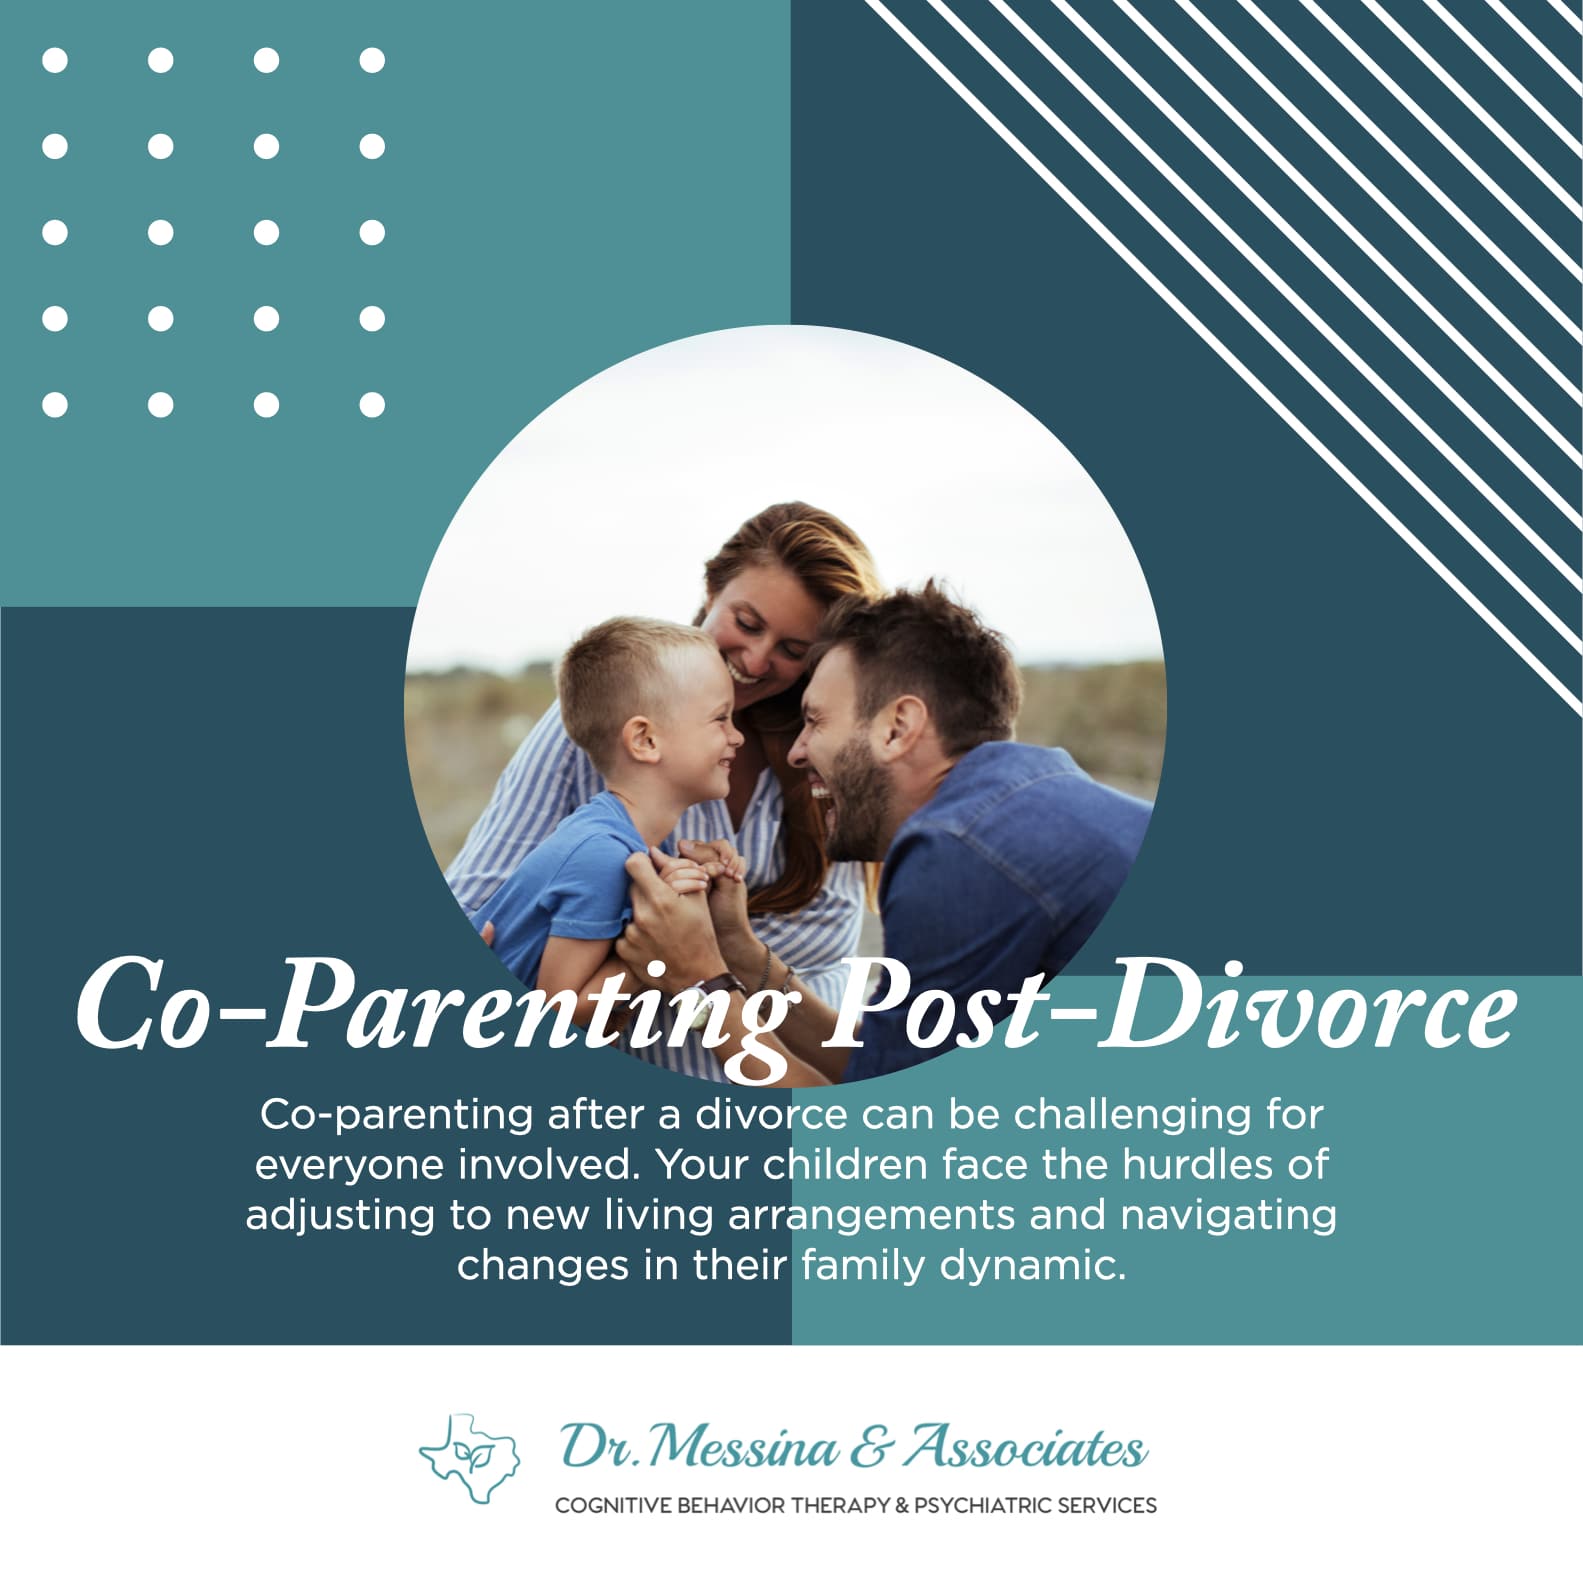 Co-parenting after divorce with guidance from a Southlake family therapist.